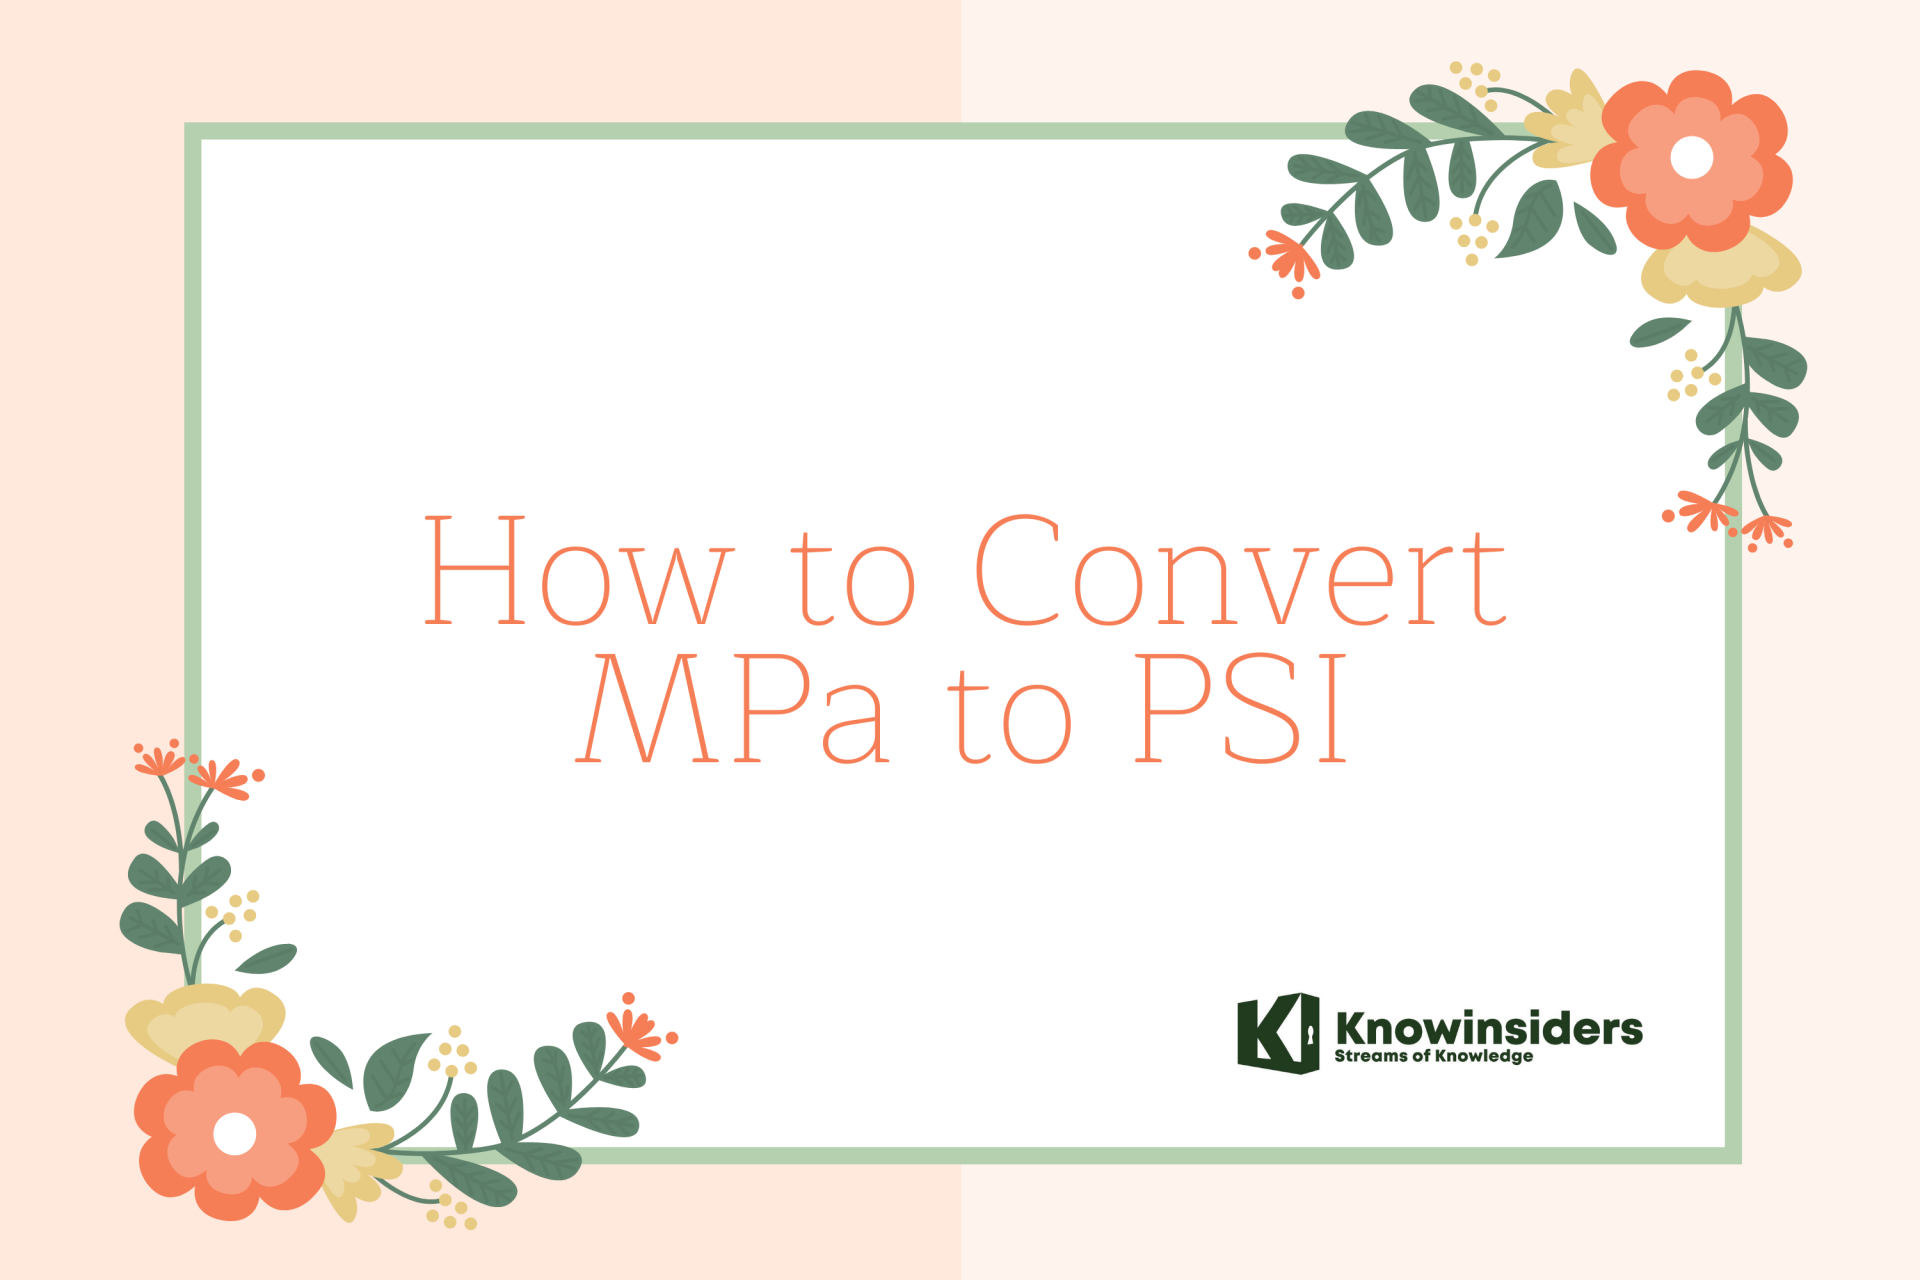 How to Convert MPa to PSI